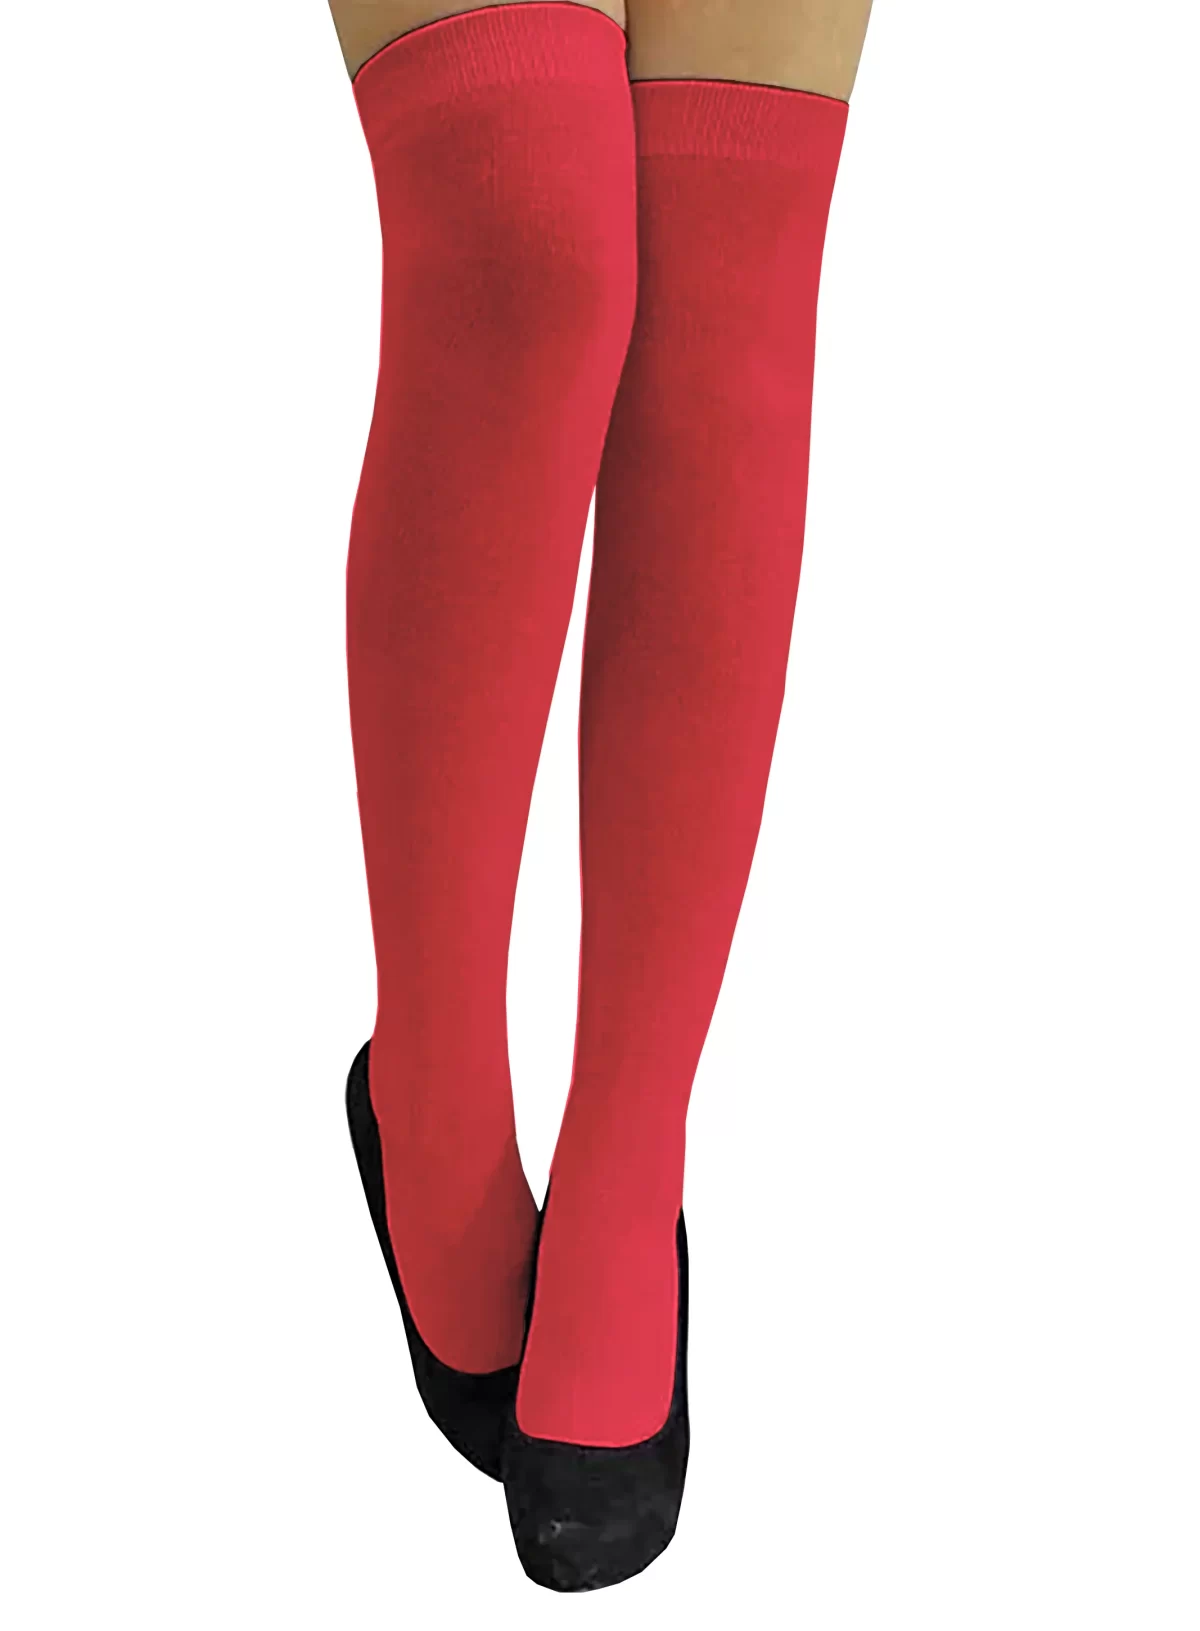 Red Girls and Women's Thigh High Stocking/Socks ( Free Size )2